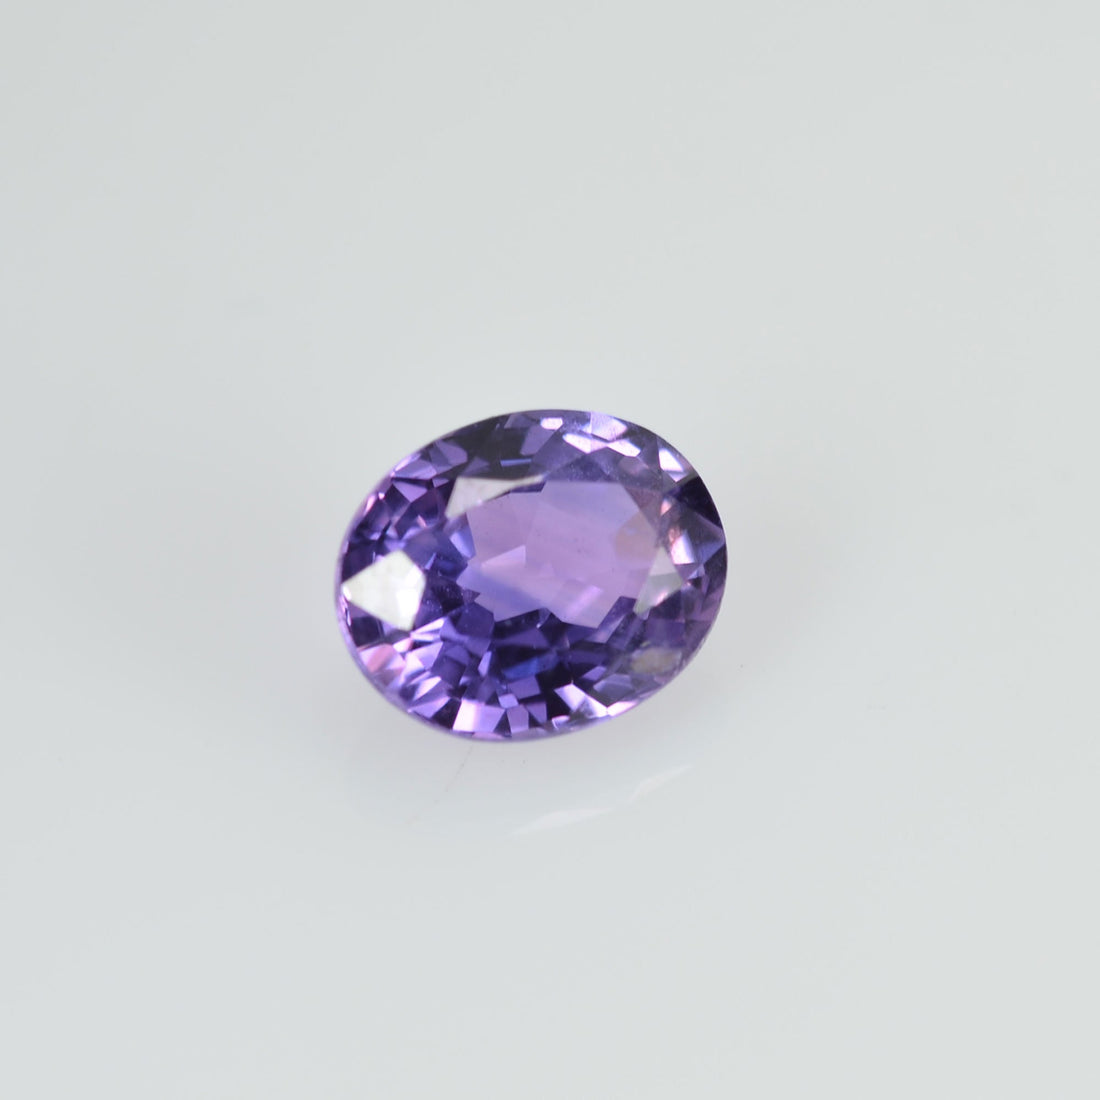 0.47 cts Natural Purple Sapphire Loose Gemstone Oval Cut